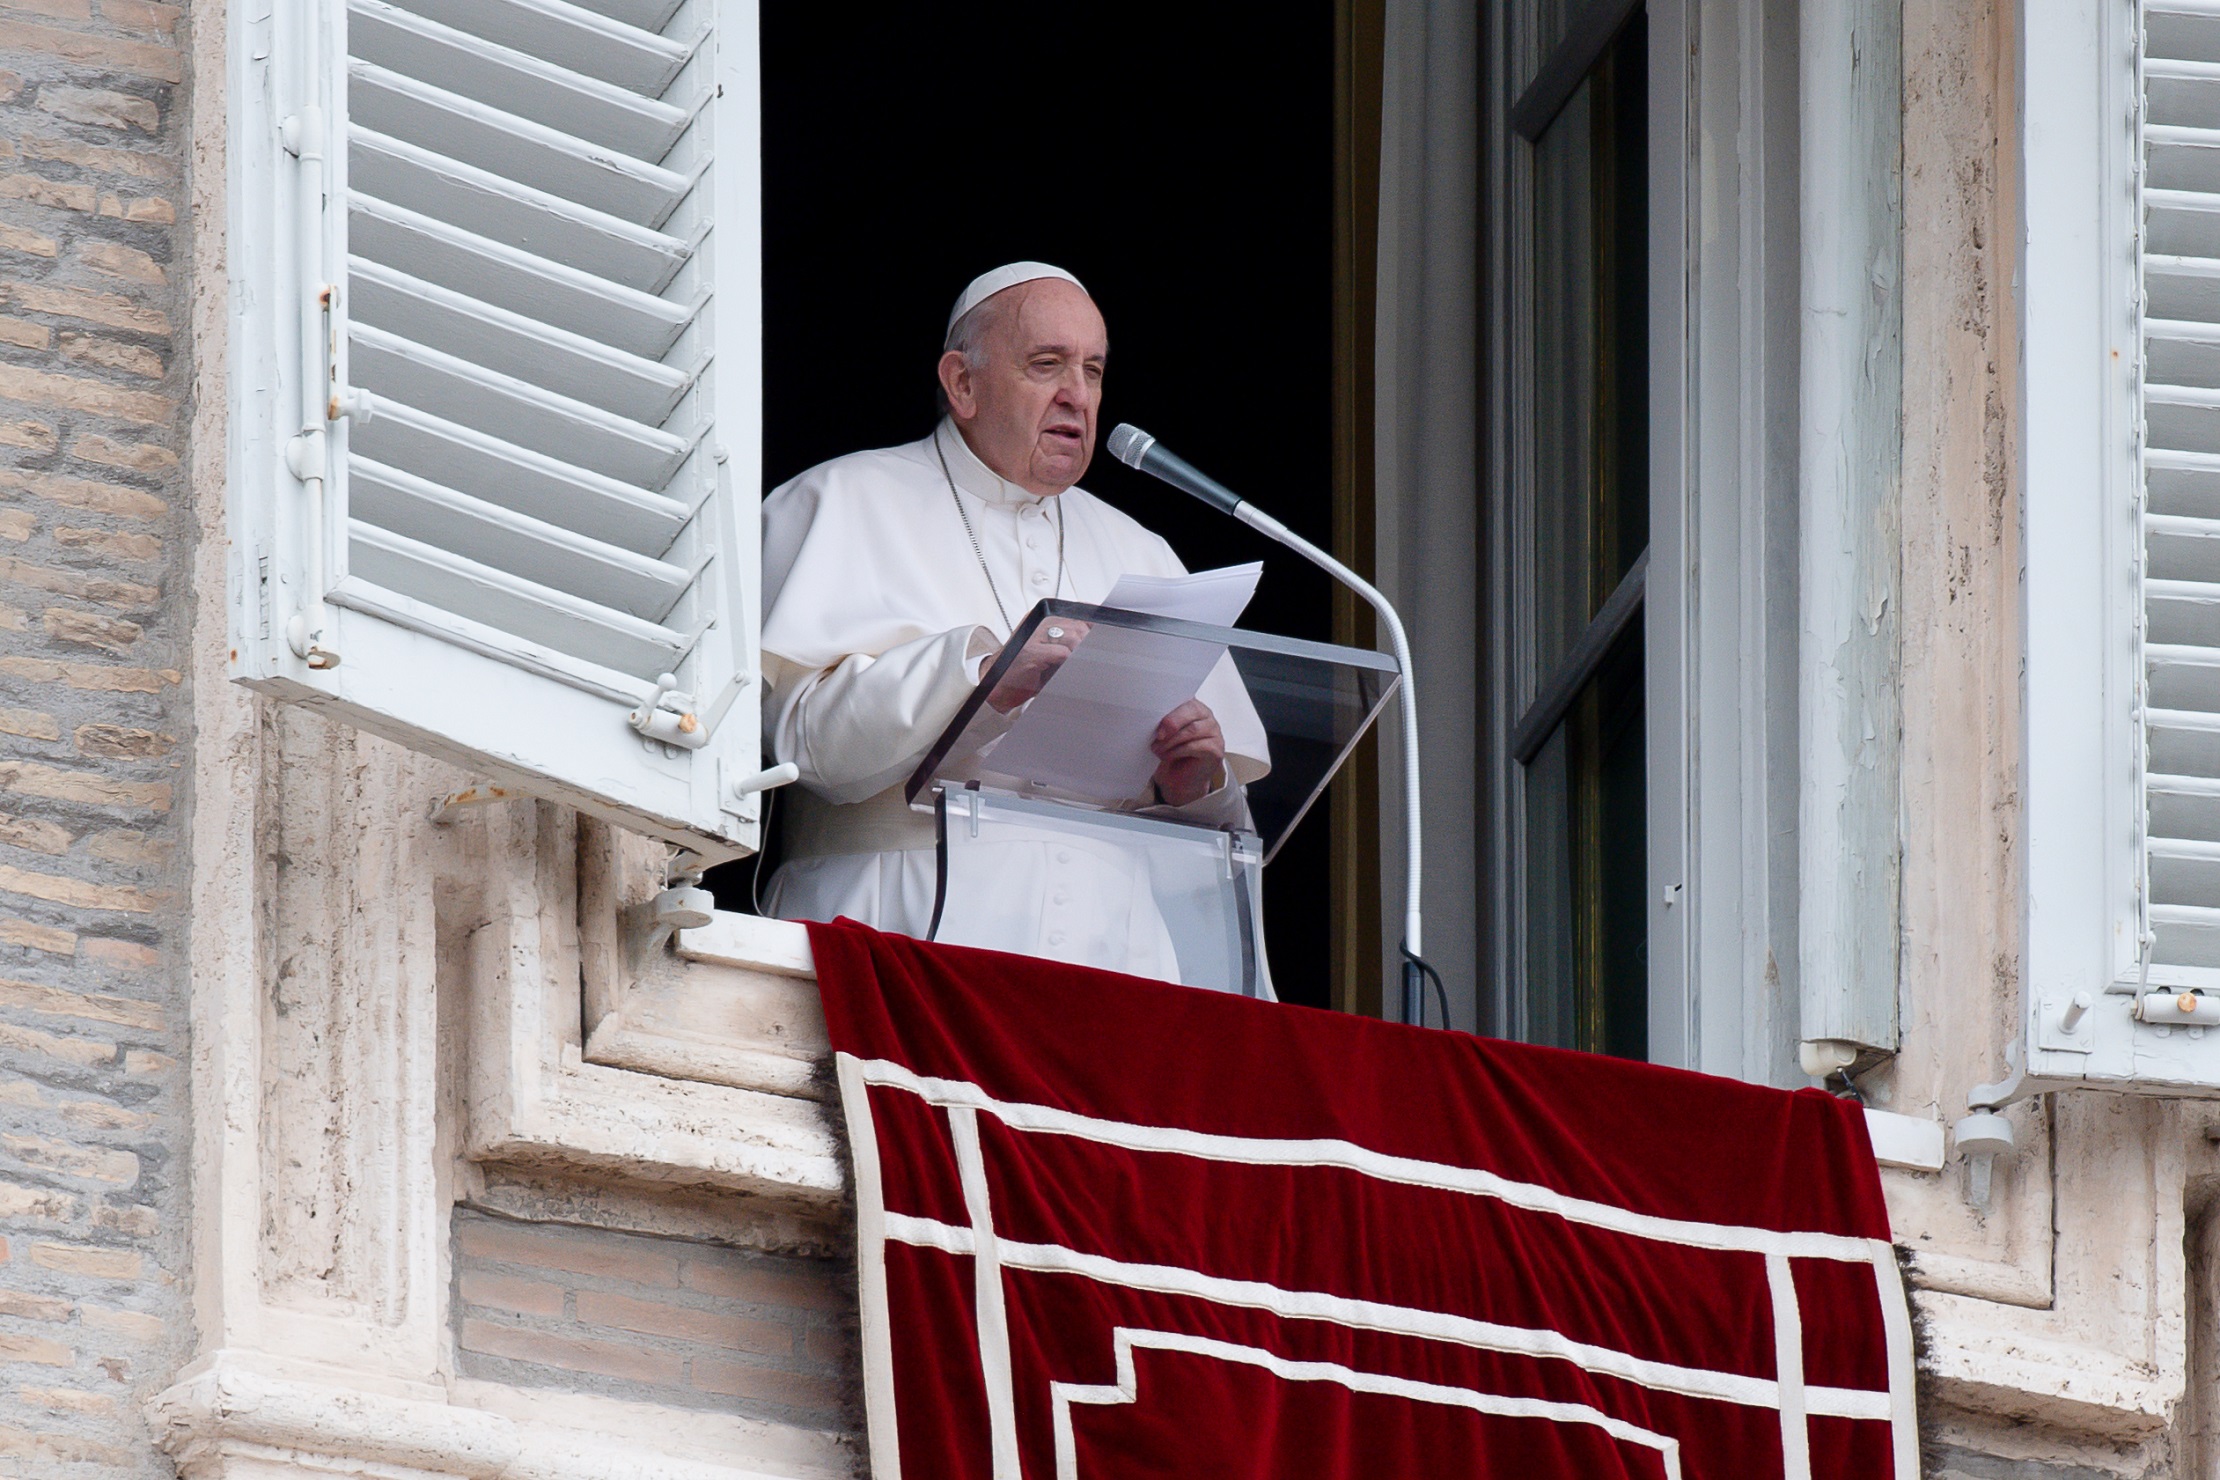 Pope Francis speaks during the Angelus prayer on May 23, 2021